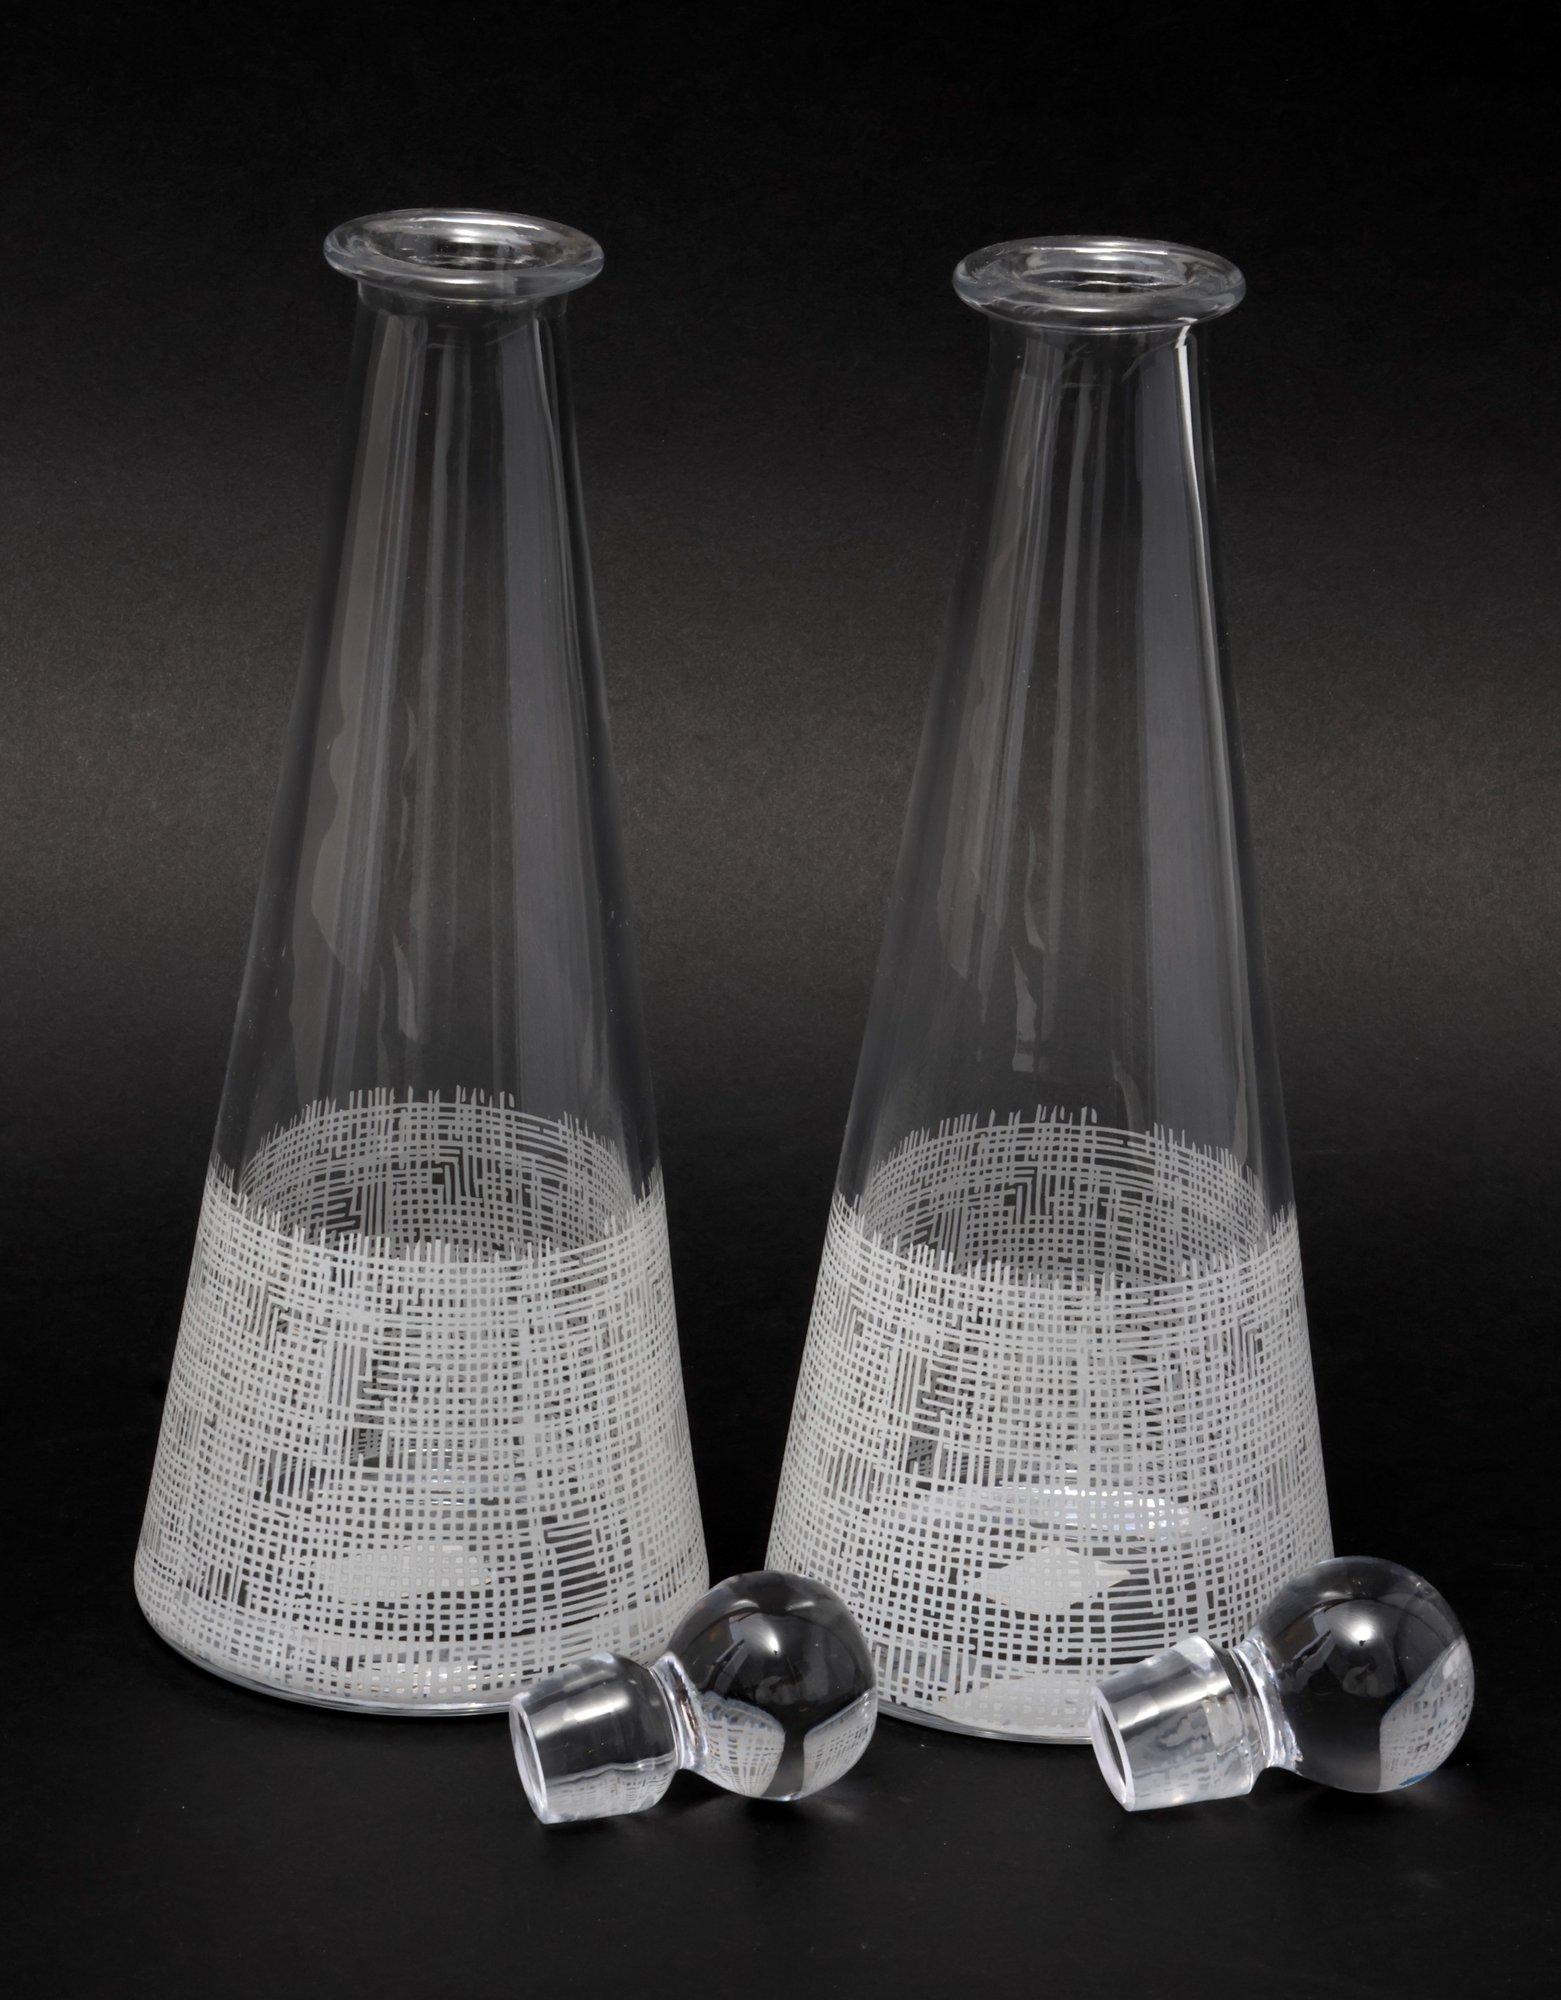 Pair Of Champange Glasses With Decanter